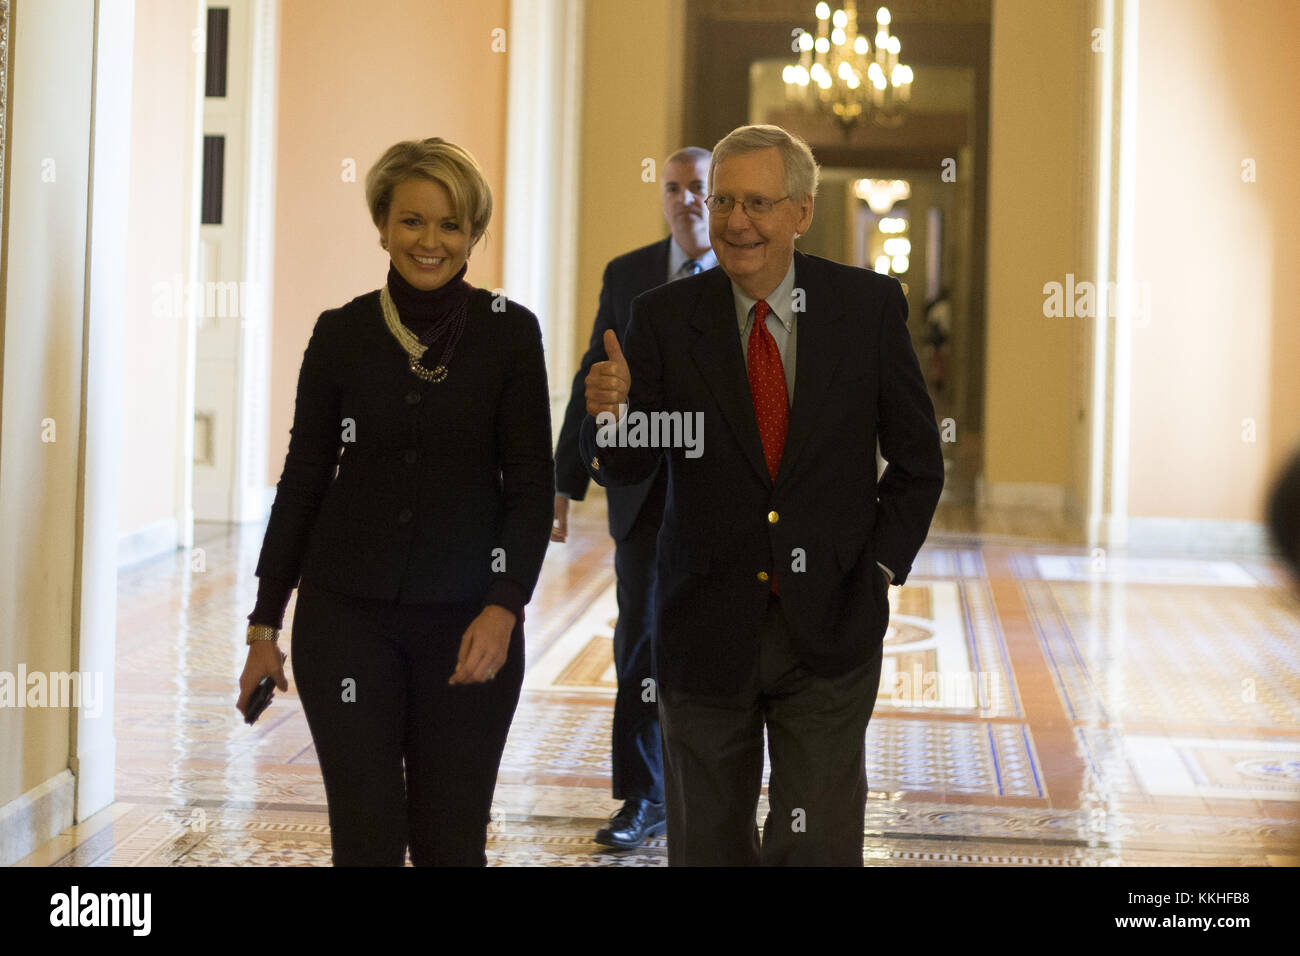 Washington, District of Columbia, USA. 1st Dec, 2017. United States Senate Majority Leader MITCH MCCONNELL (Republican of Kentucky) gives a thumbs up as he walks with a staffer from his office to the Senate chamber for a procedural vote to move forward with voting on the Republican proposed tax reform bill at the United States Capitol. Credit: Alex Edelman/CNP/ZUMA Wire/Alamy Live News Stock Photo